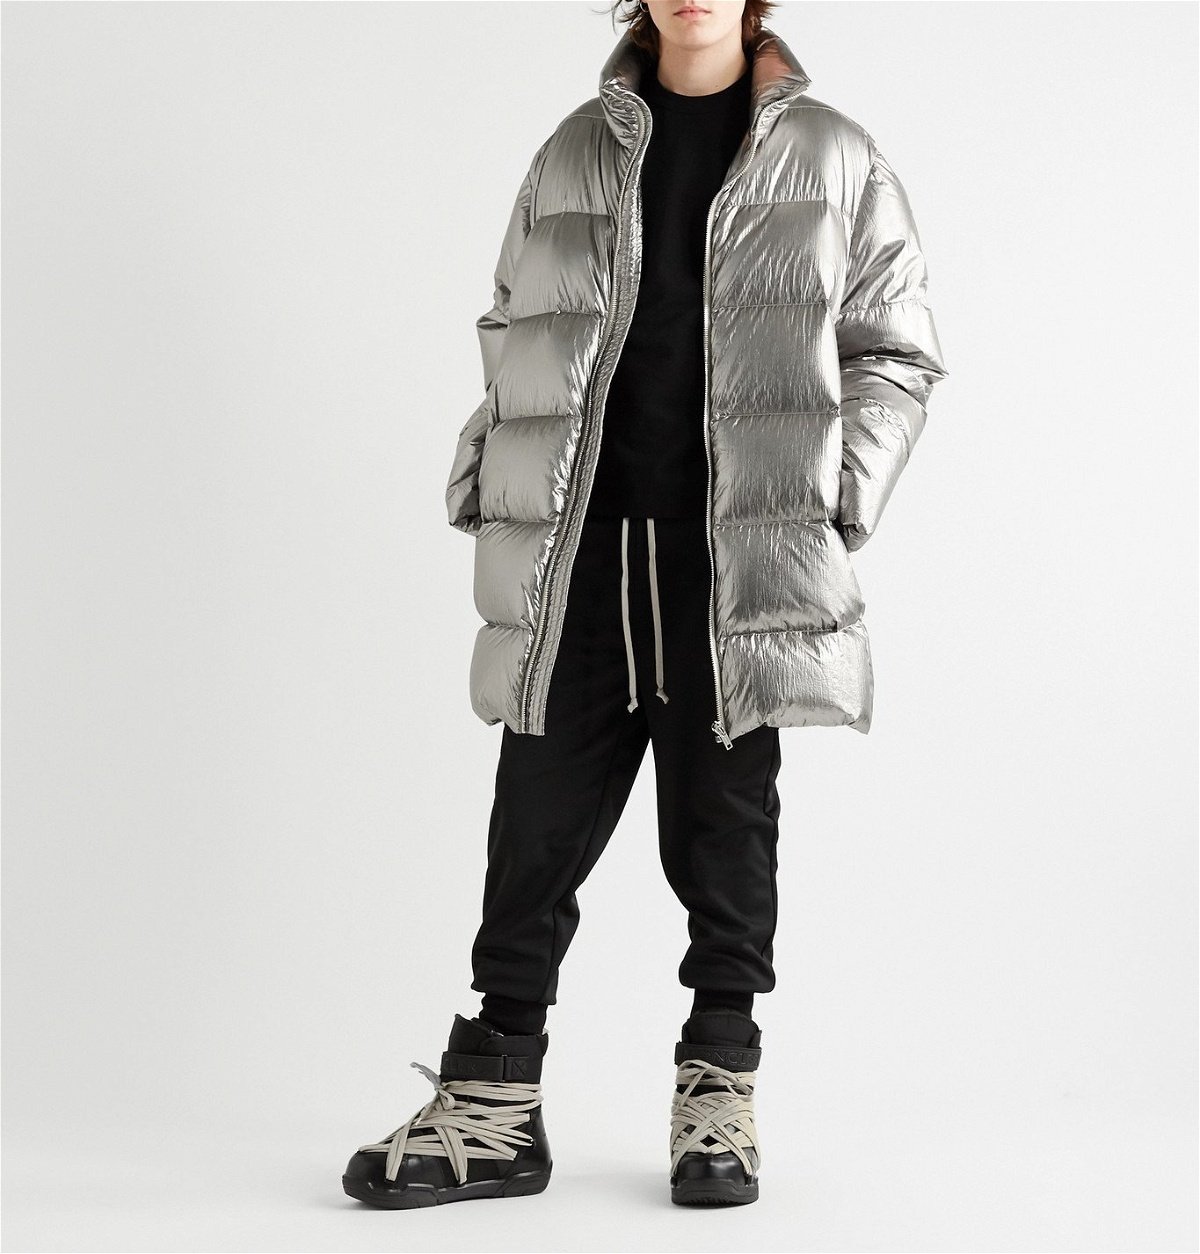 Rick Owens - Moncler Amber Canvas-Trimmed Leather Snow Boots - Black ...